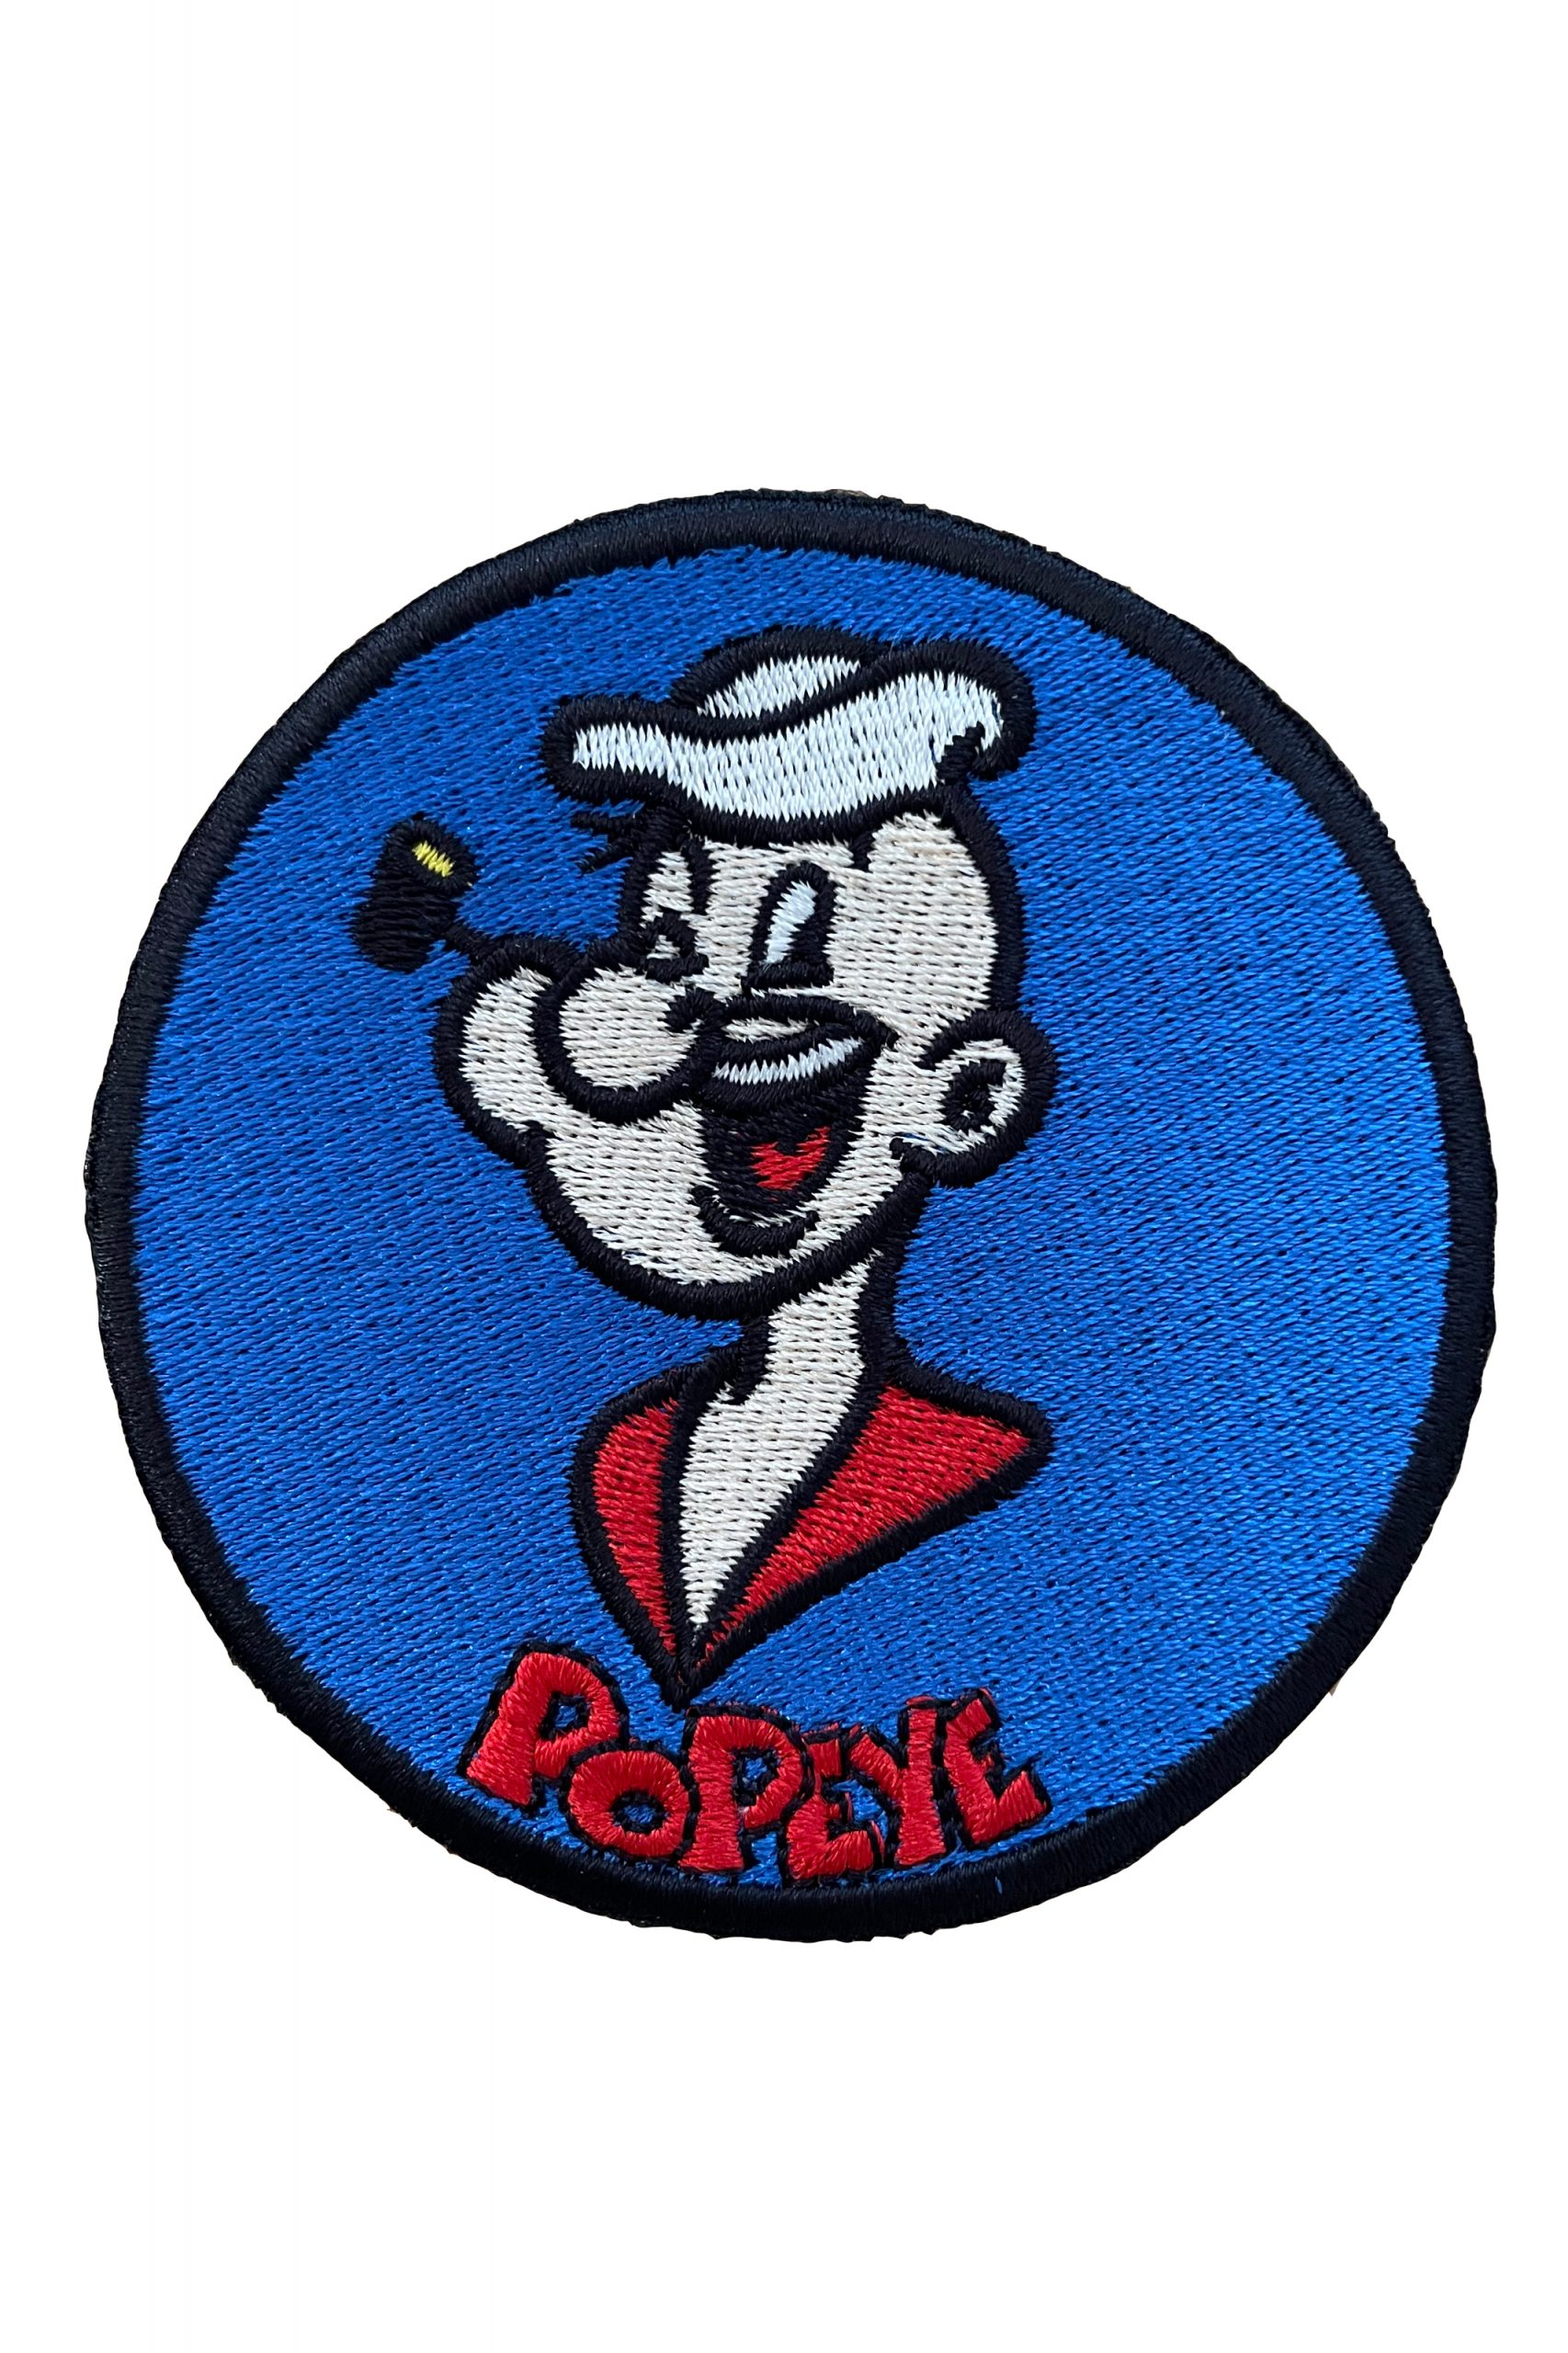 Popeye comic character in navy blue, mauve, and sky blue.